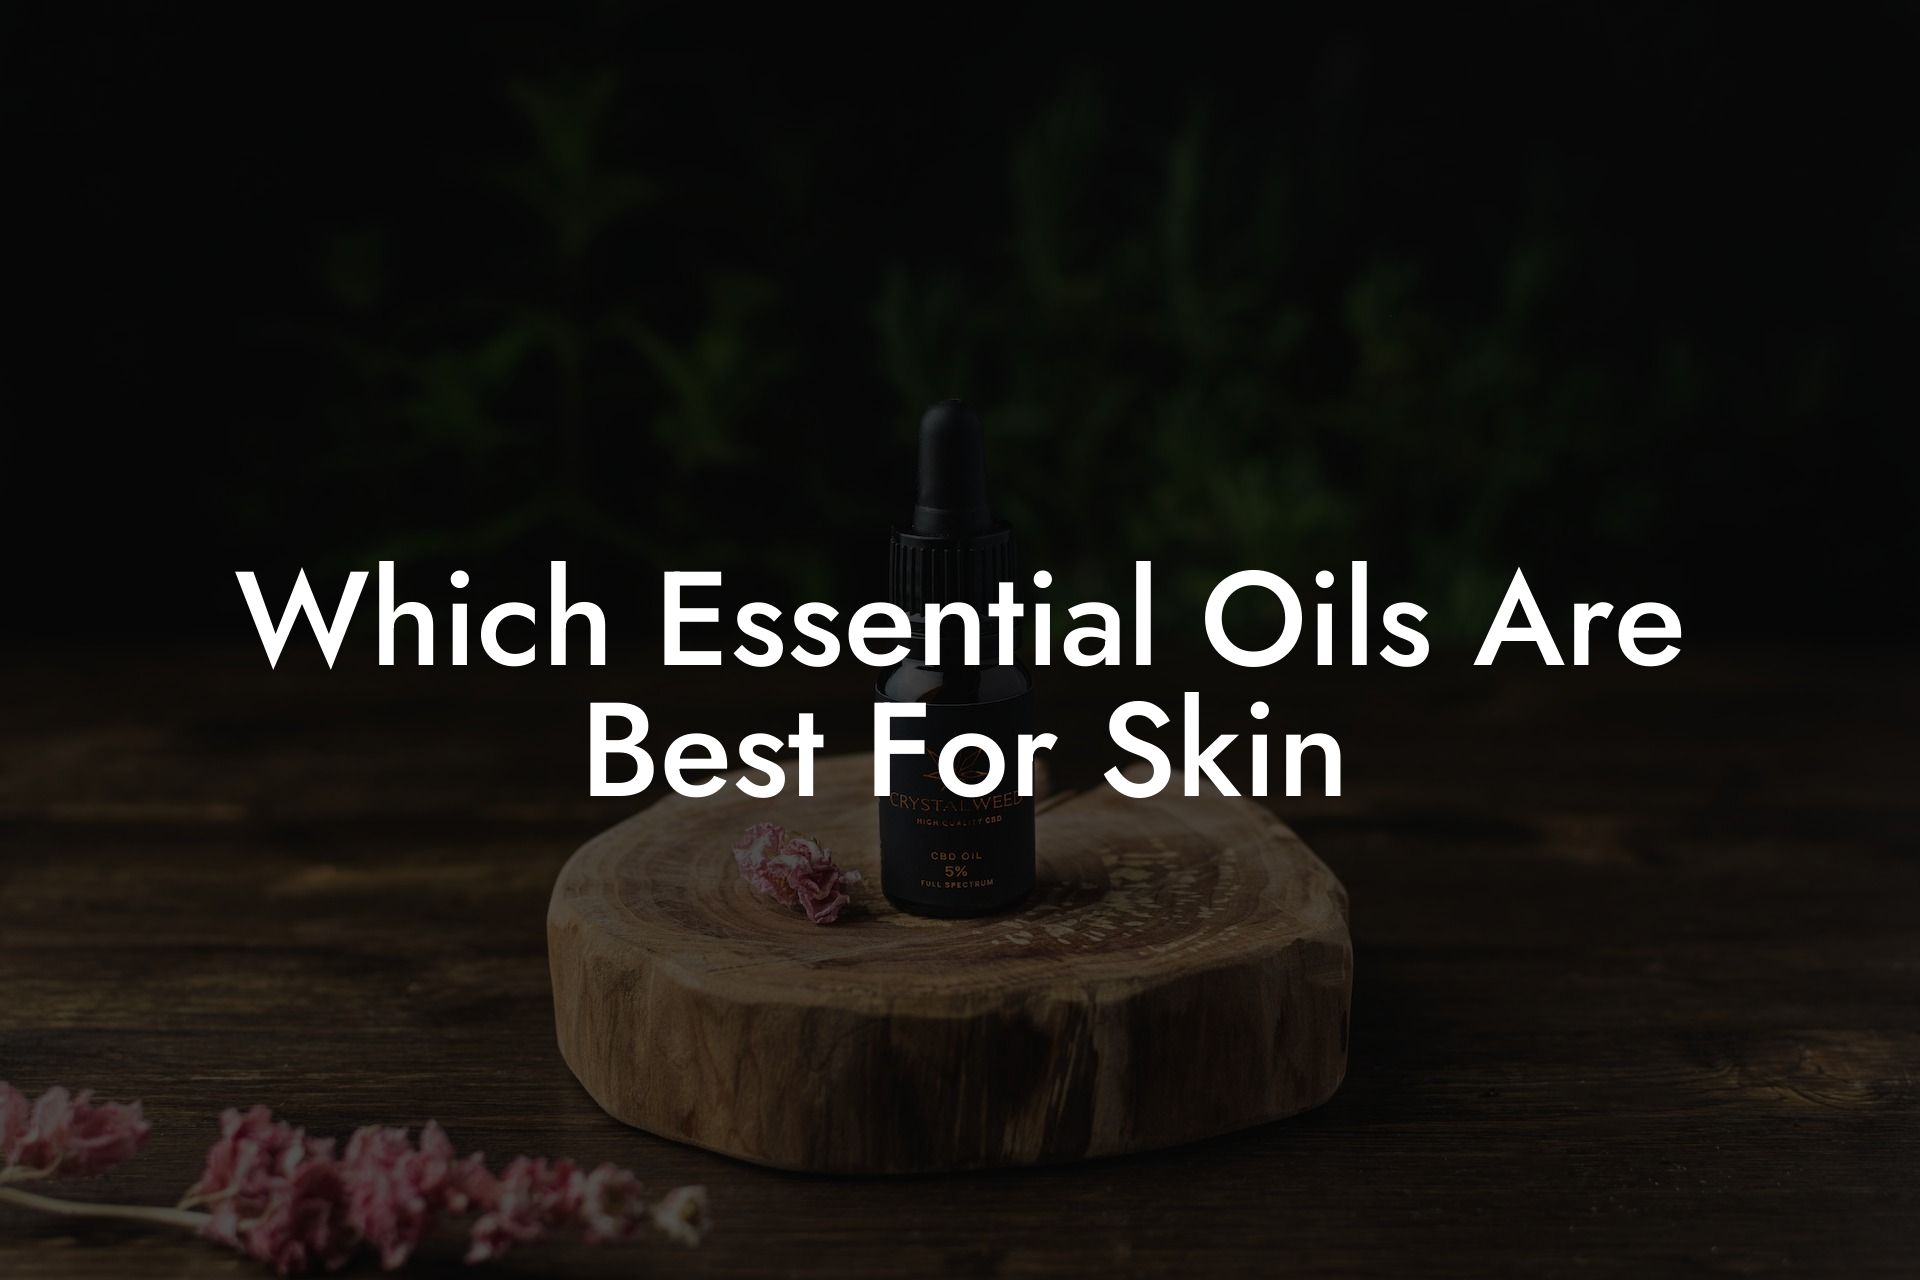 Which Essential Oils Are Best For Skin